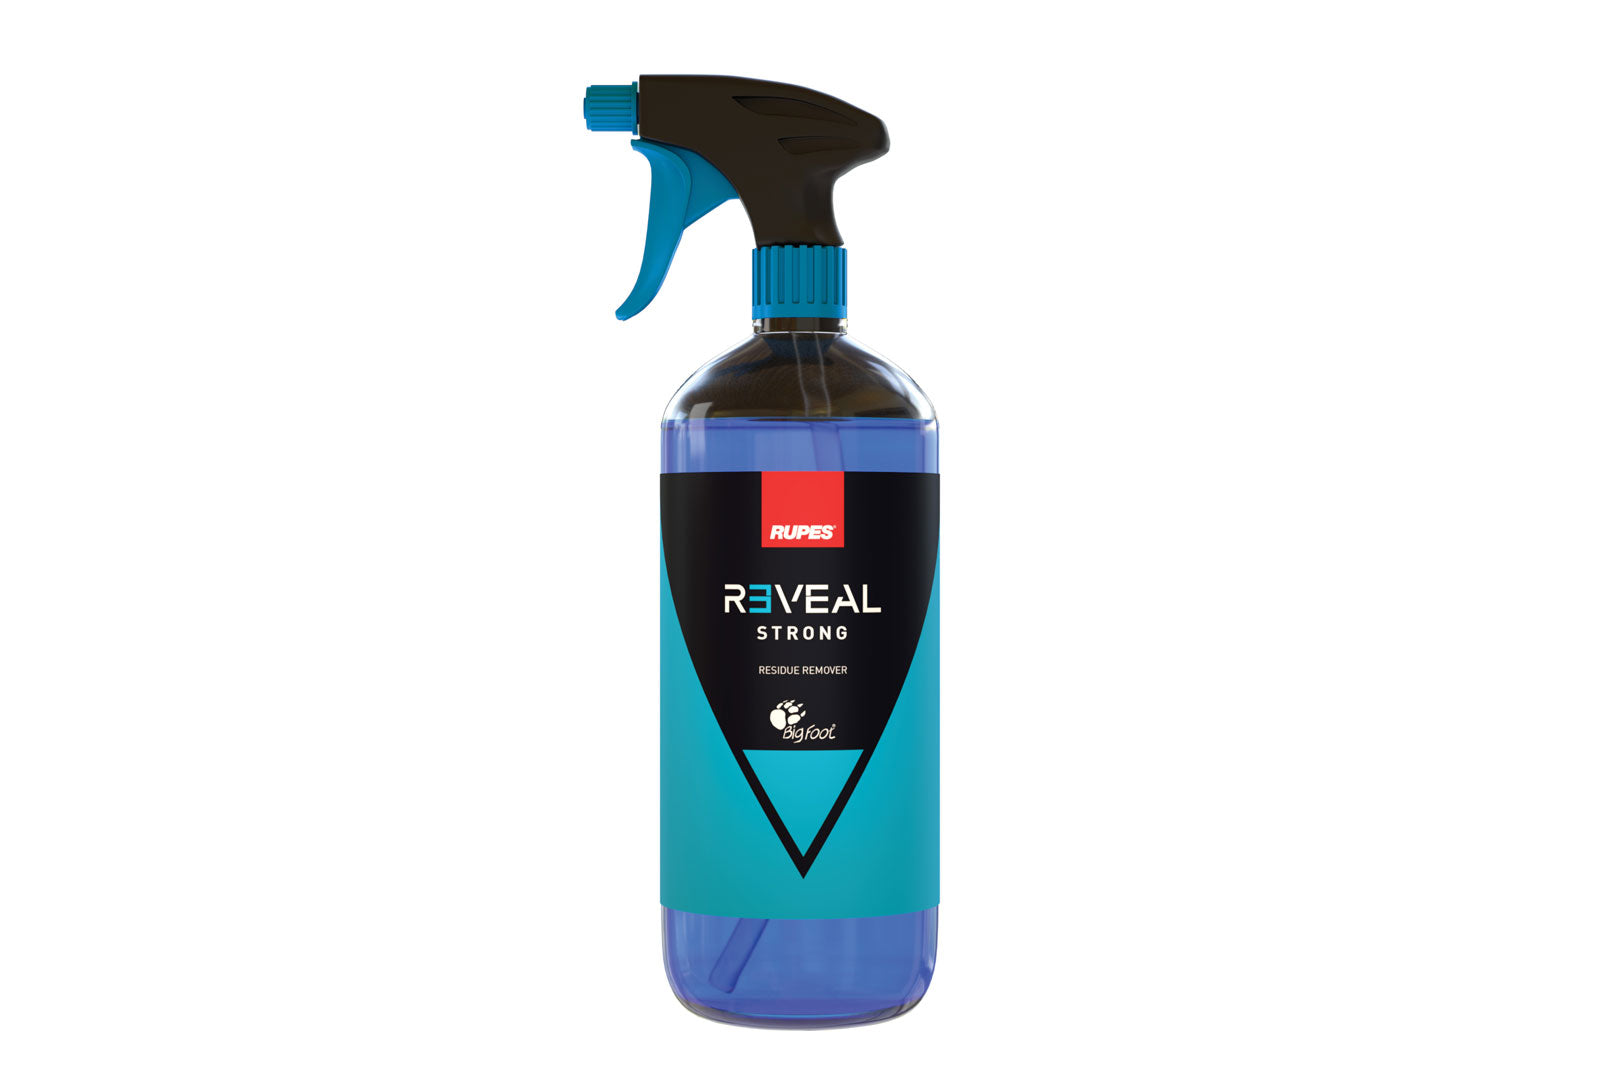 RUPES REVEAL STRONG – Residue Remover 750ml